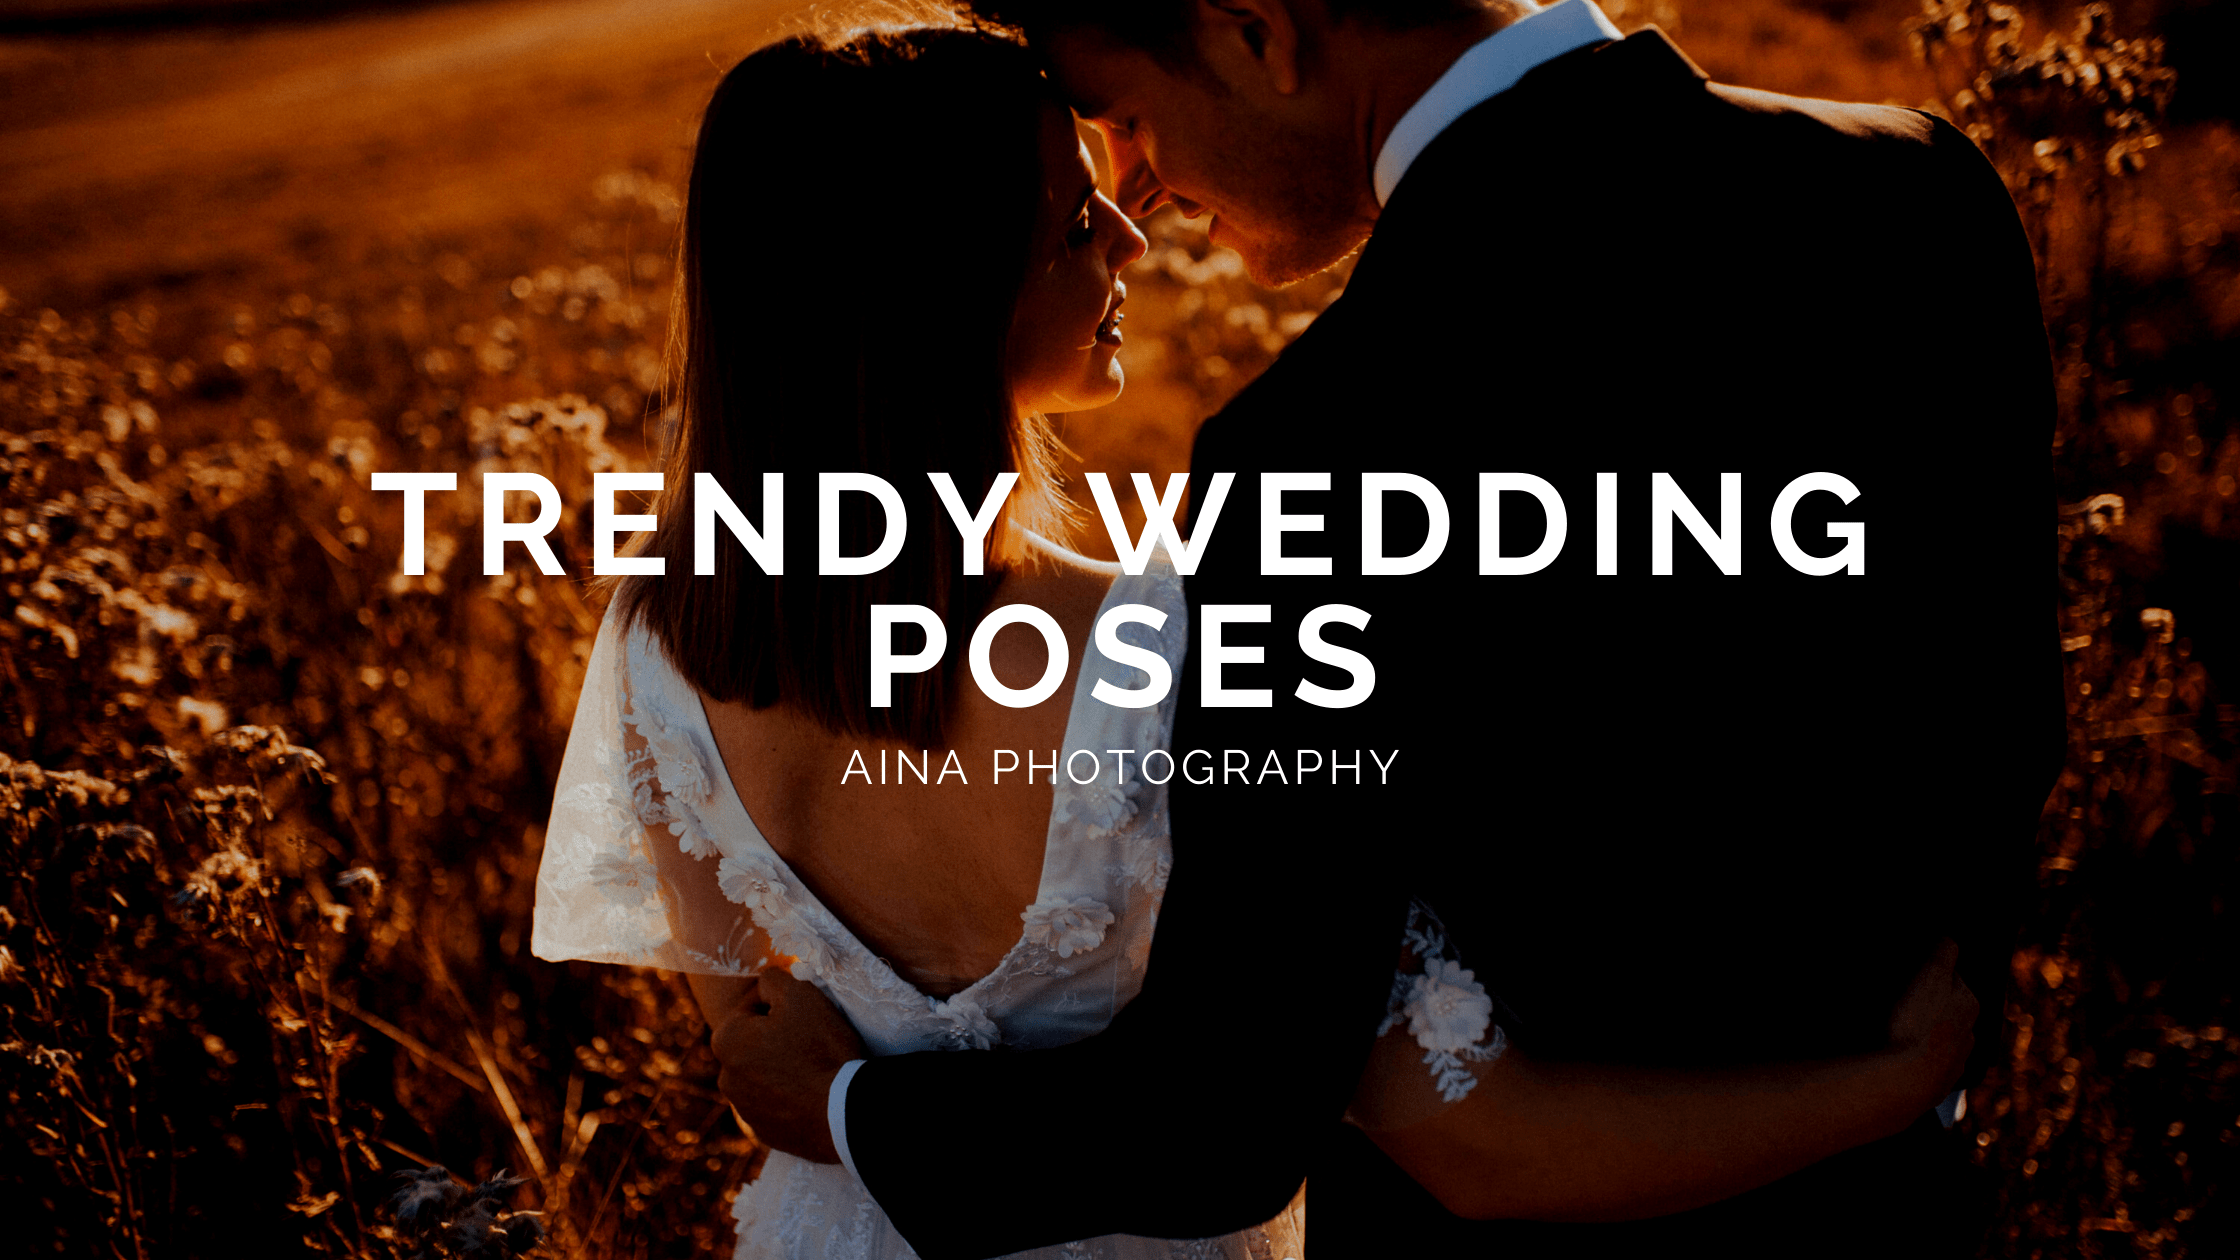 Groom Poses Show Off Your Style With These Stunning Poses